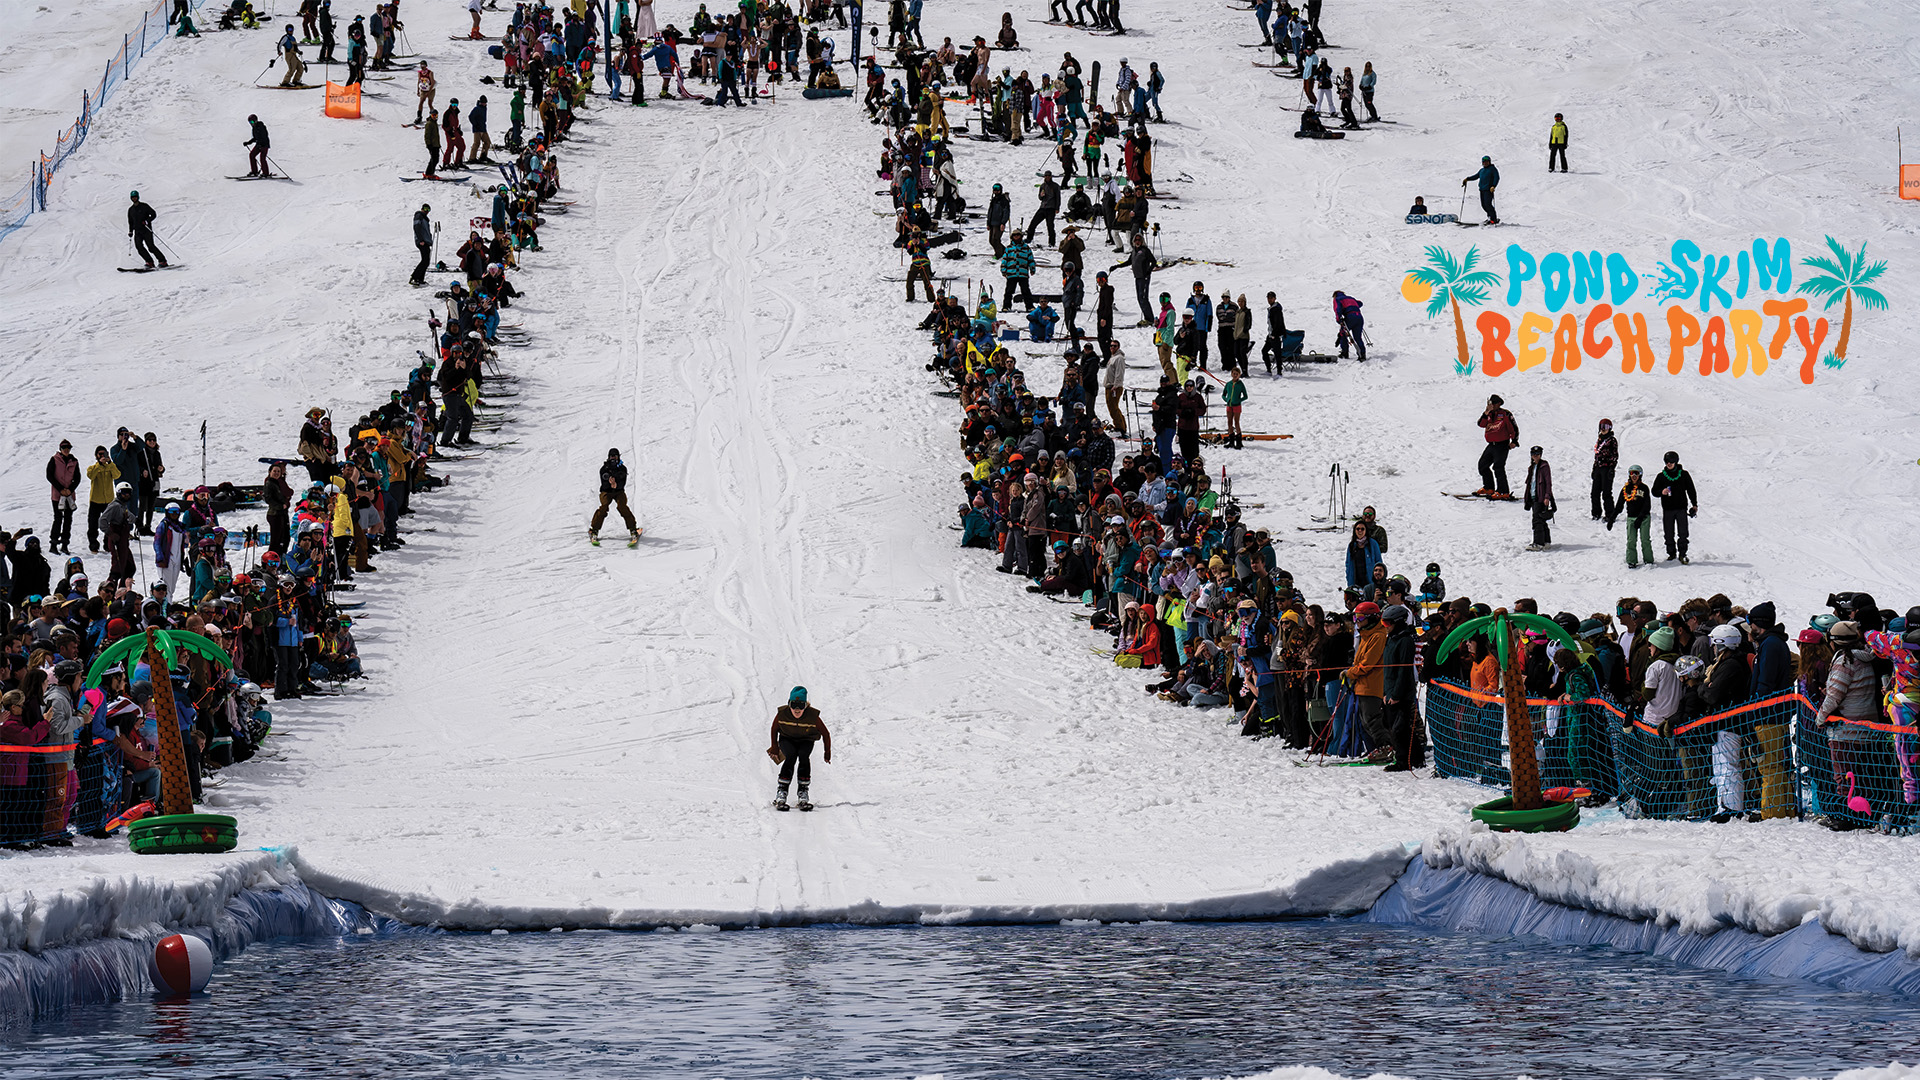 A skier about to ski across the pond at the Pond Skim at Solitude